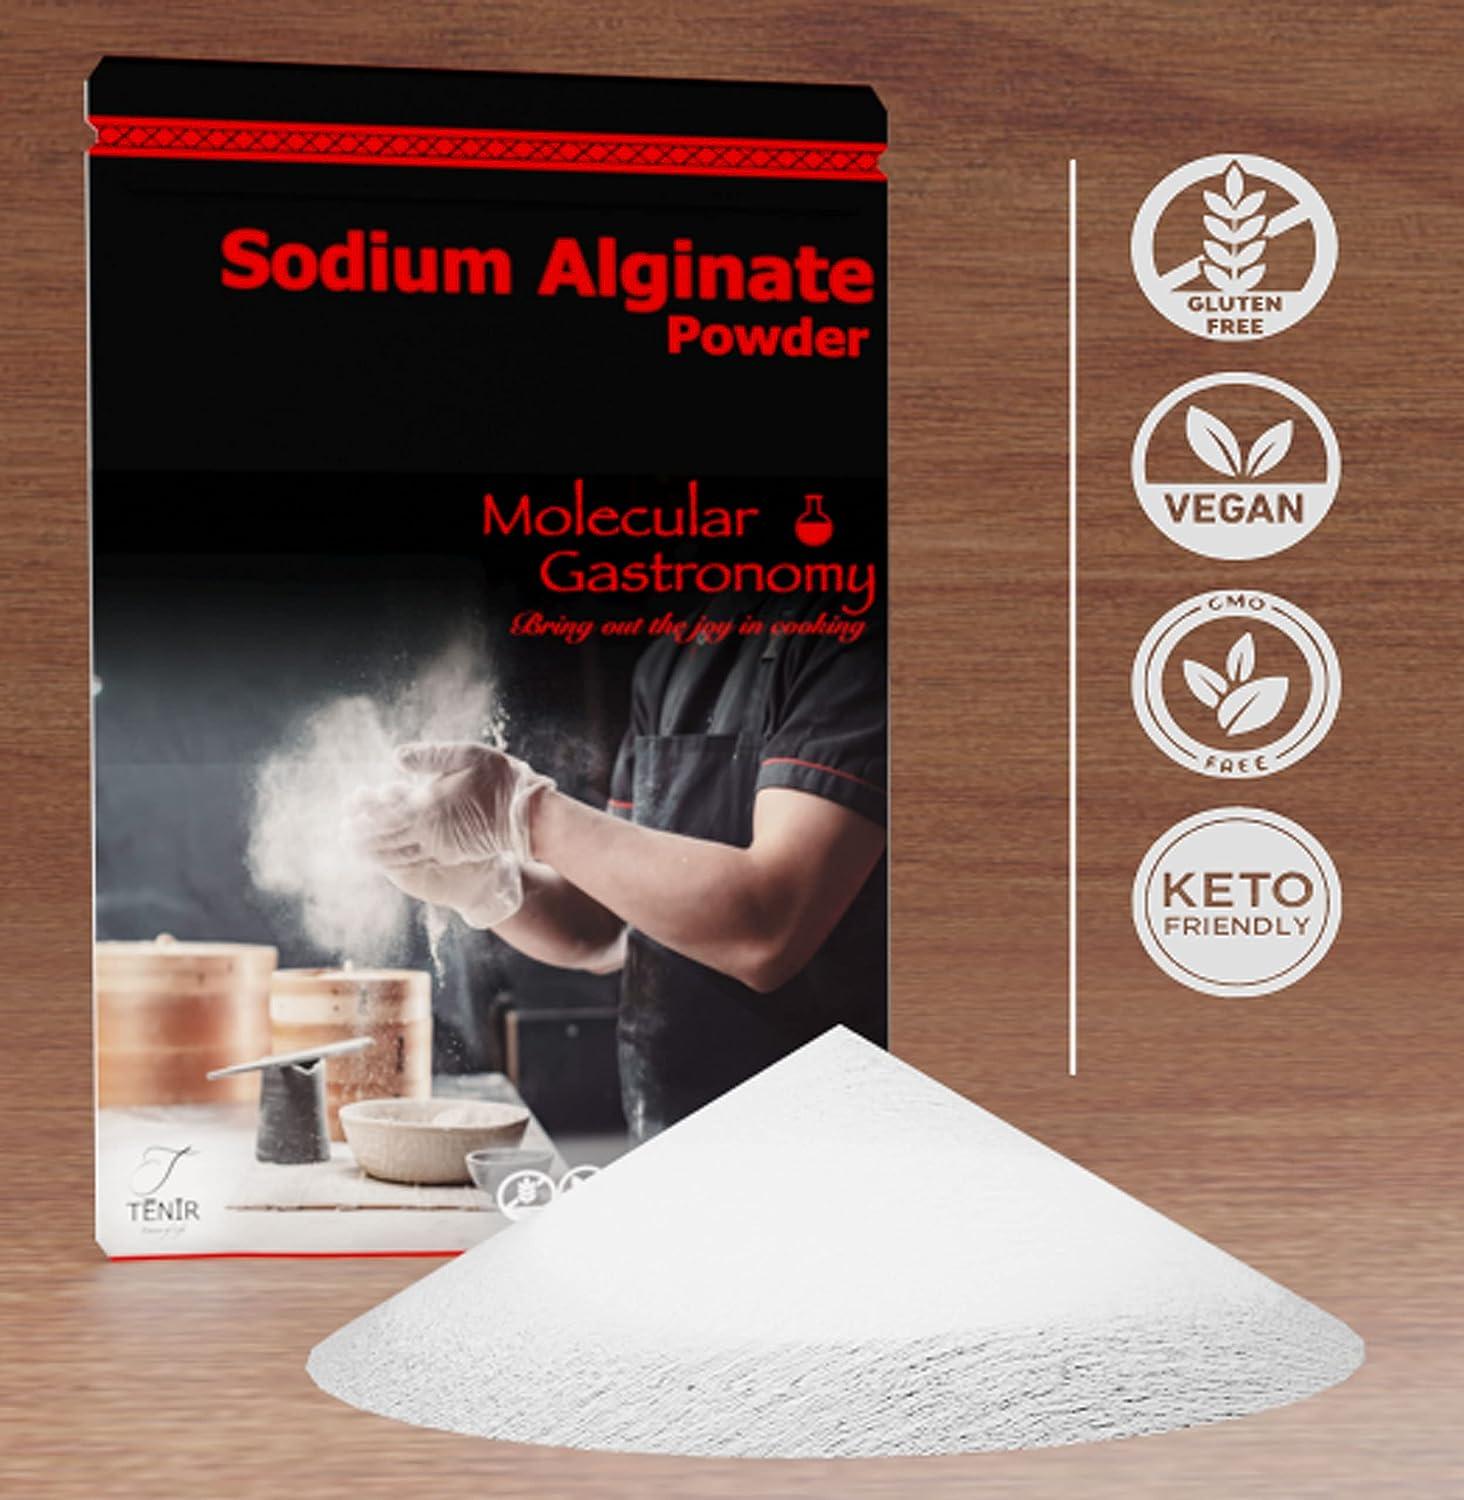 Sodium Alginate 100% Food Grade | Natural Thickening Powder & Gelling Agent  for Cooking (8 Oz)…